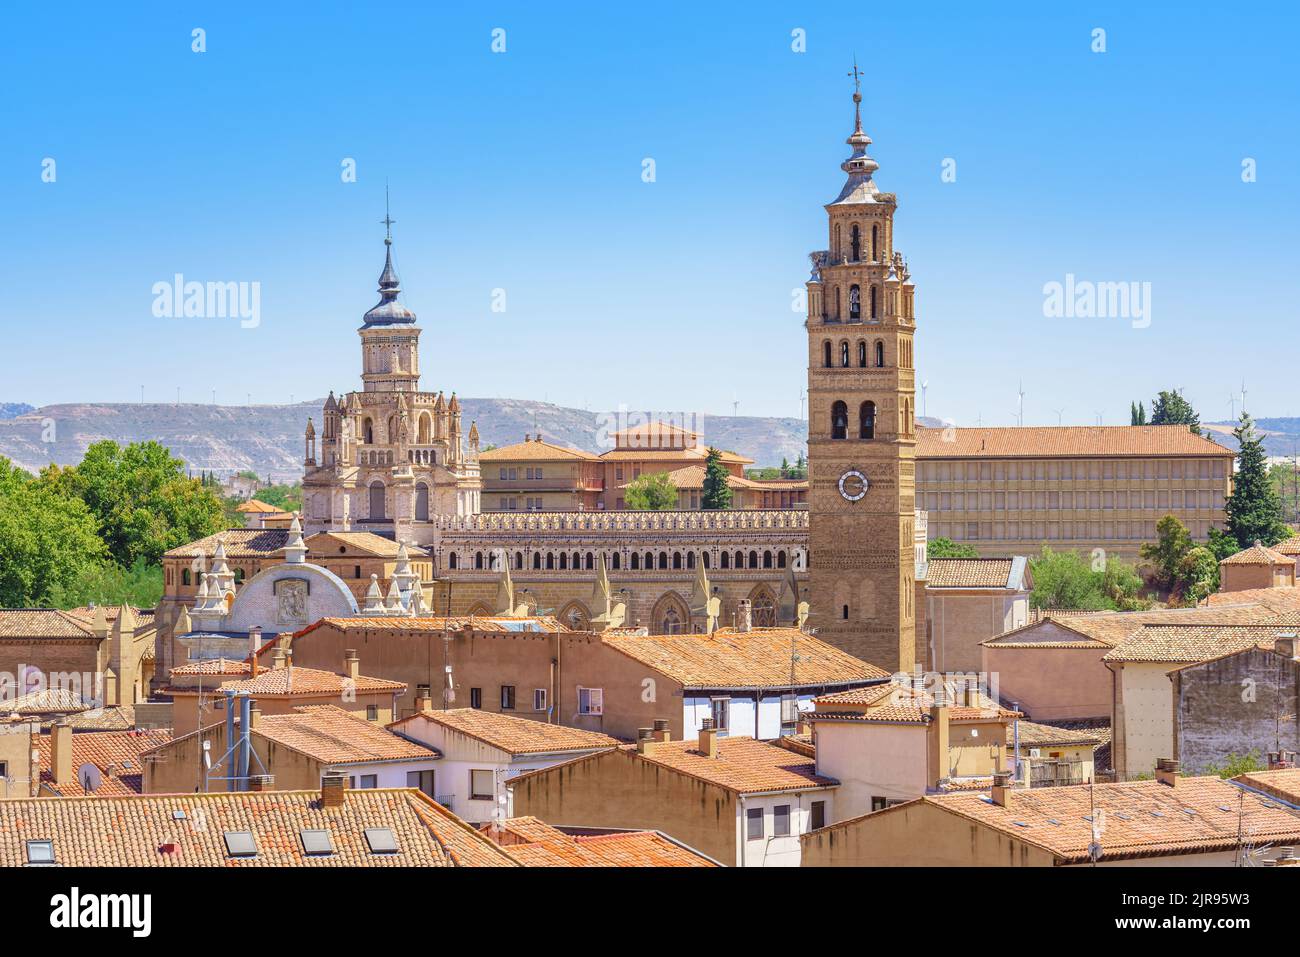 Elevated view of Tarazona cathedral in Aragon, Spain Stock Photo